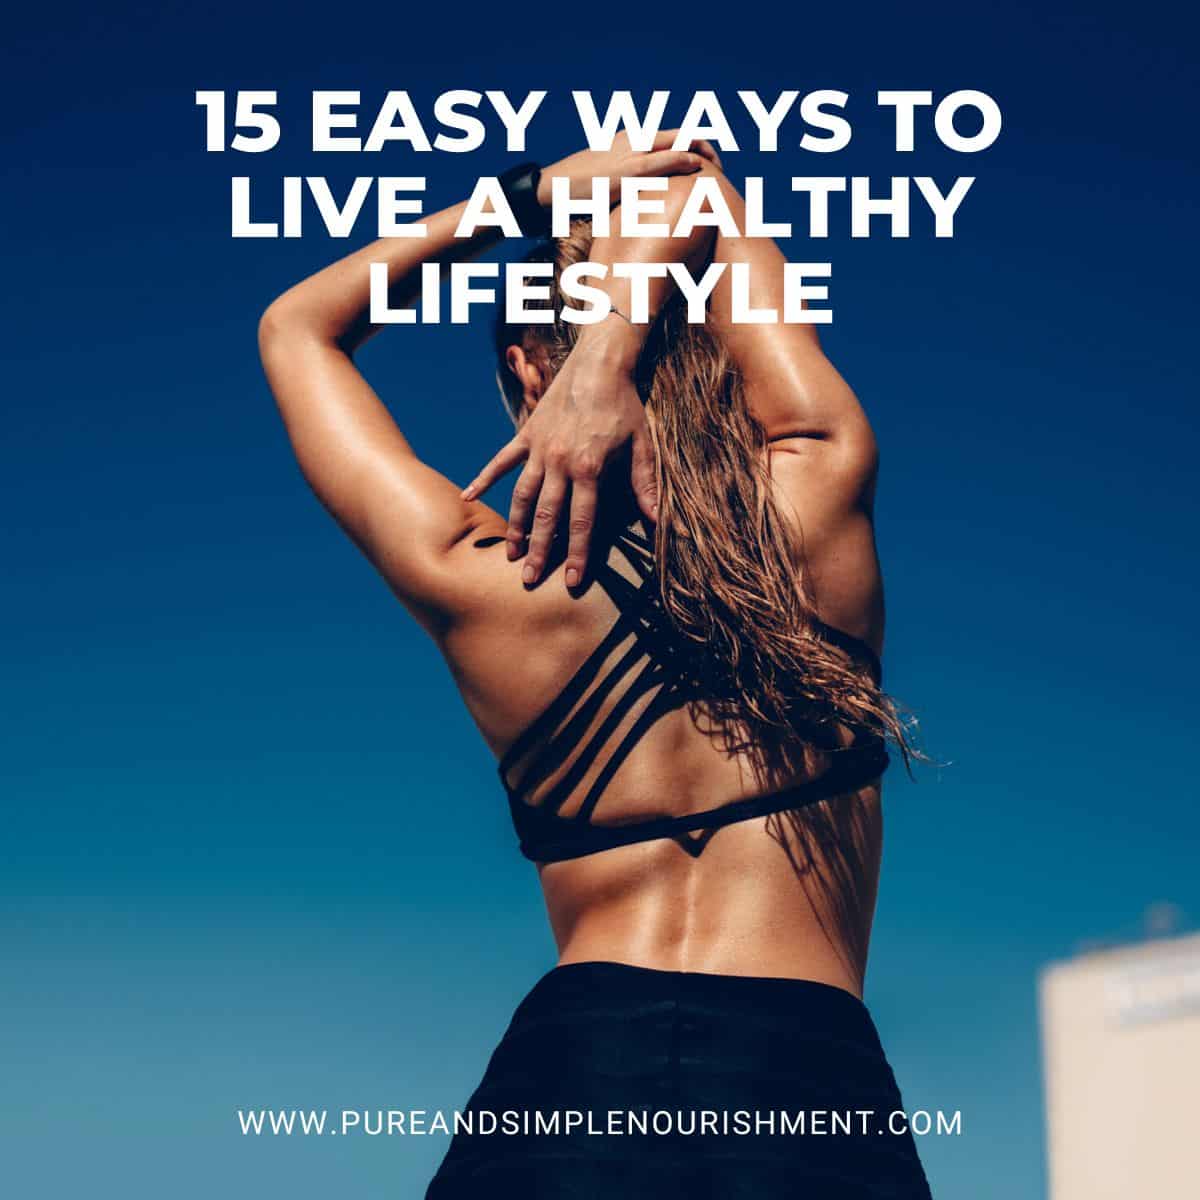 A women stretching her arms behind her with the title Easy Ways To Live A Healthy Lifestyle over her.